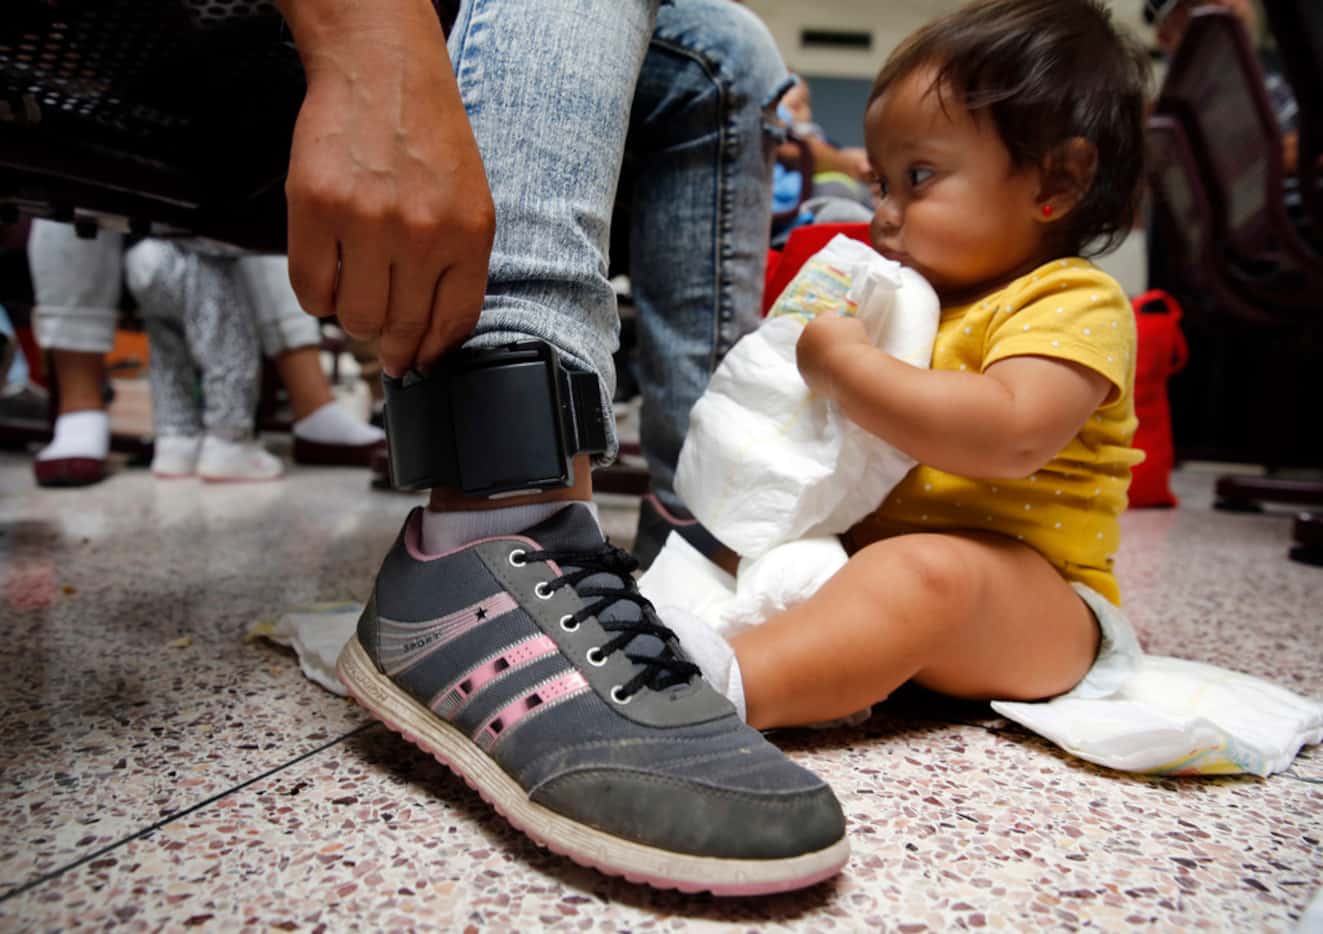 Damaris Gonzalez, 20, of Guatemala shows her ankle monitor, which was attached by Border...